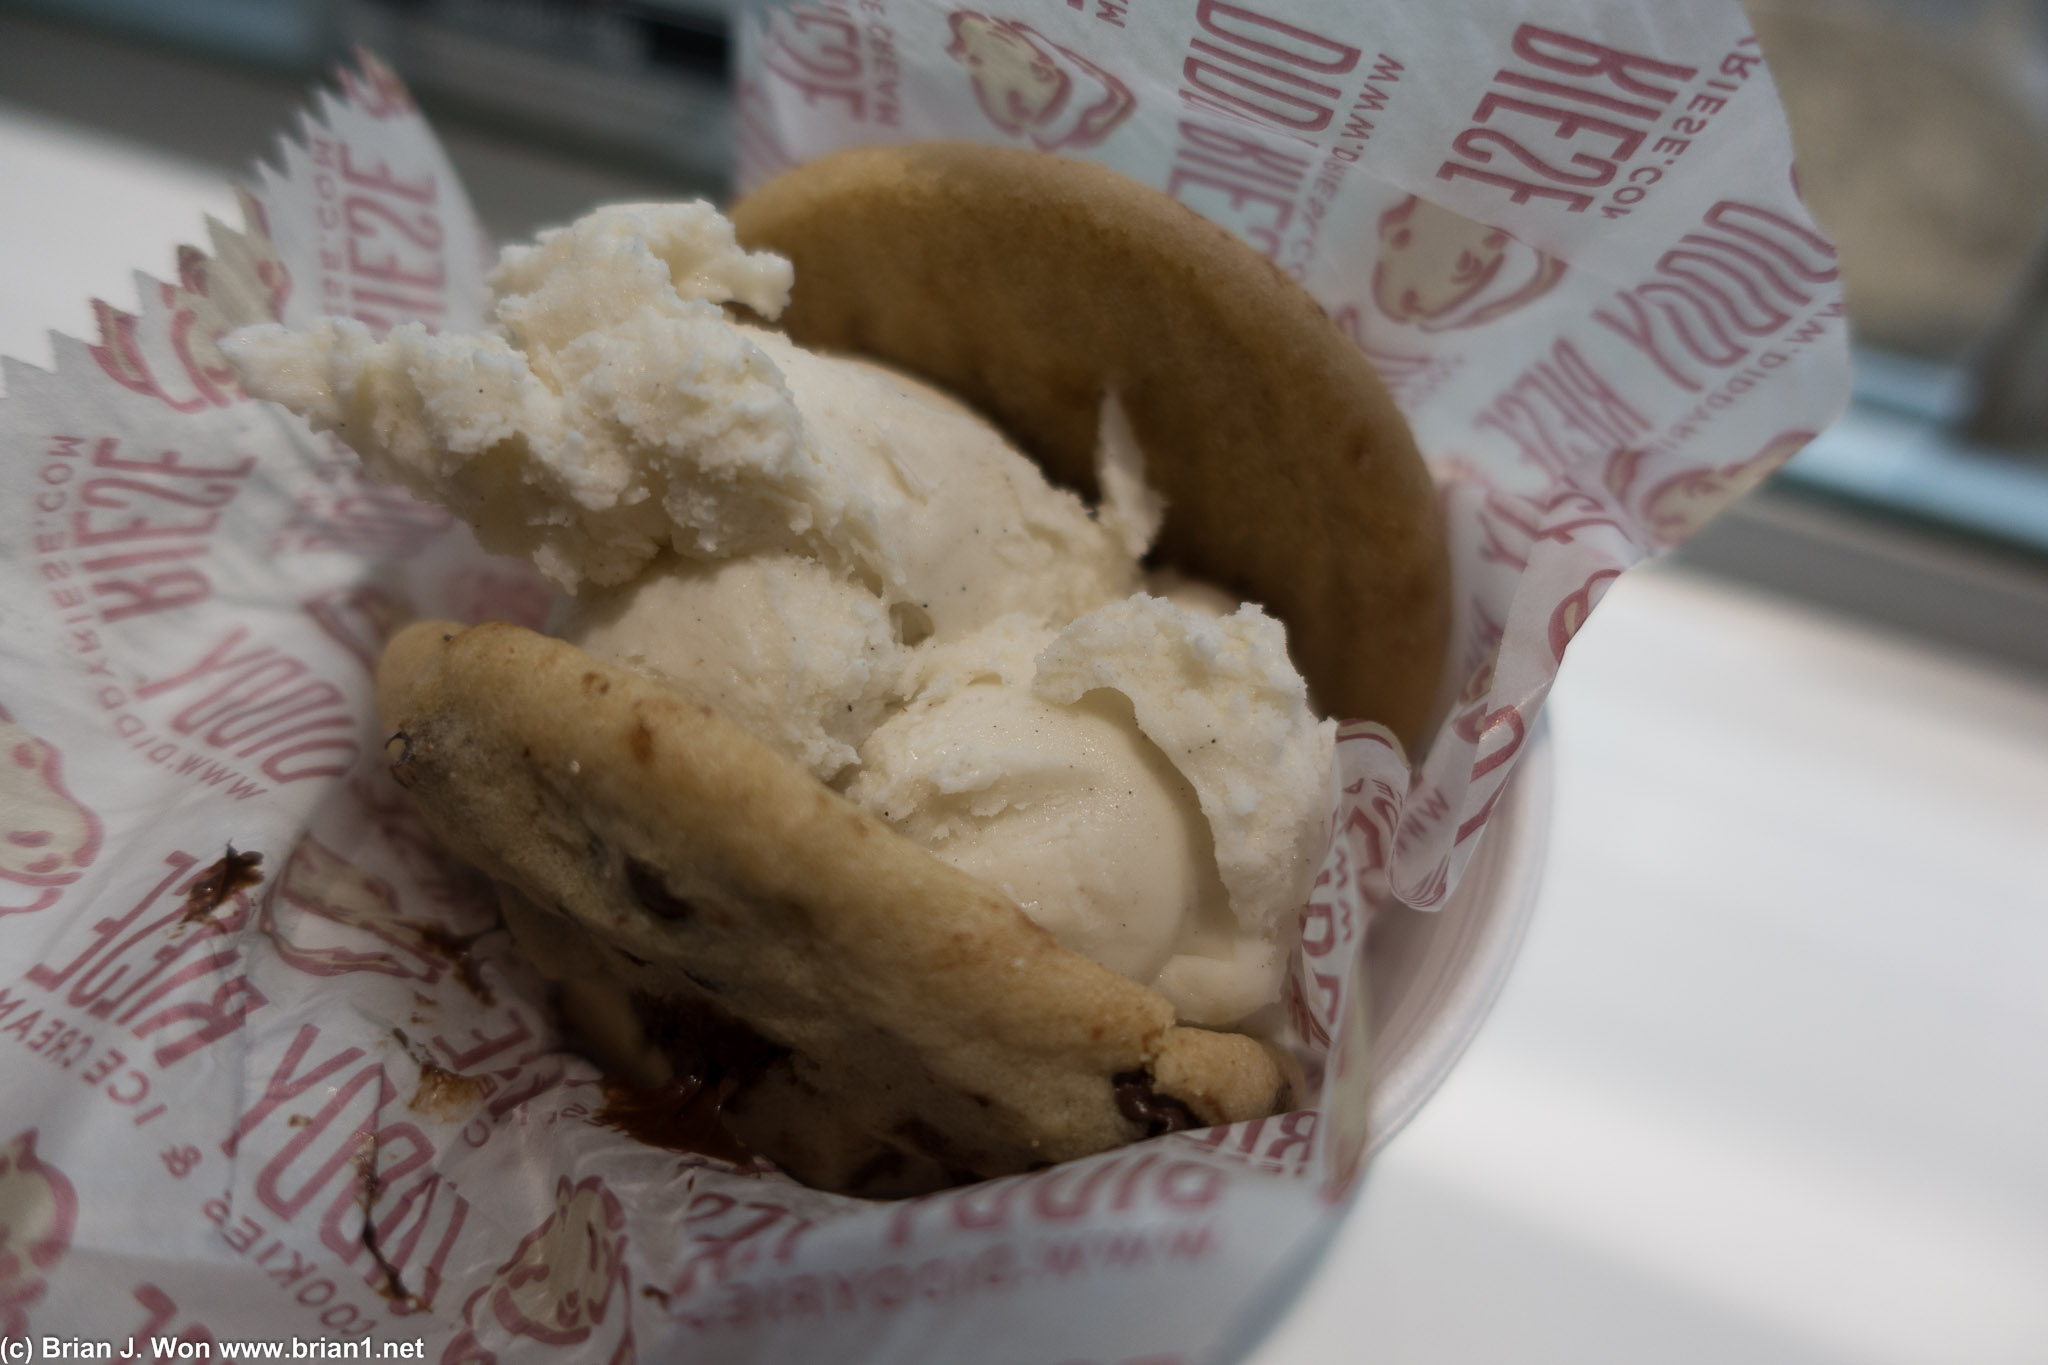 And Diddy Riese for dessert.